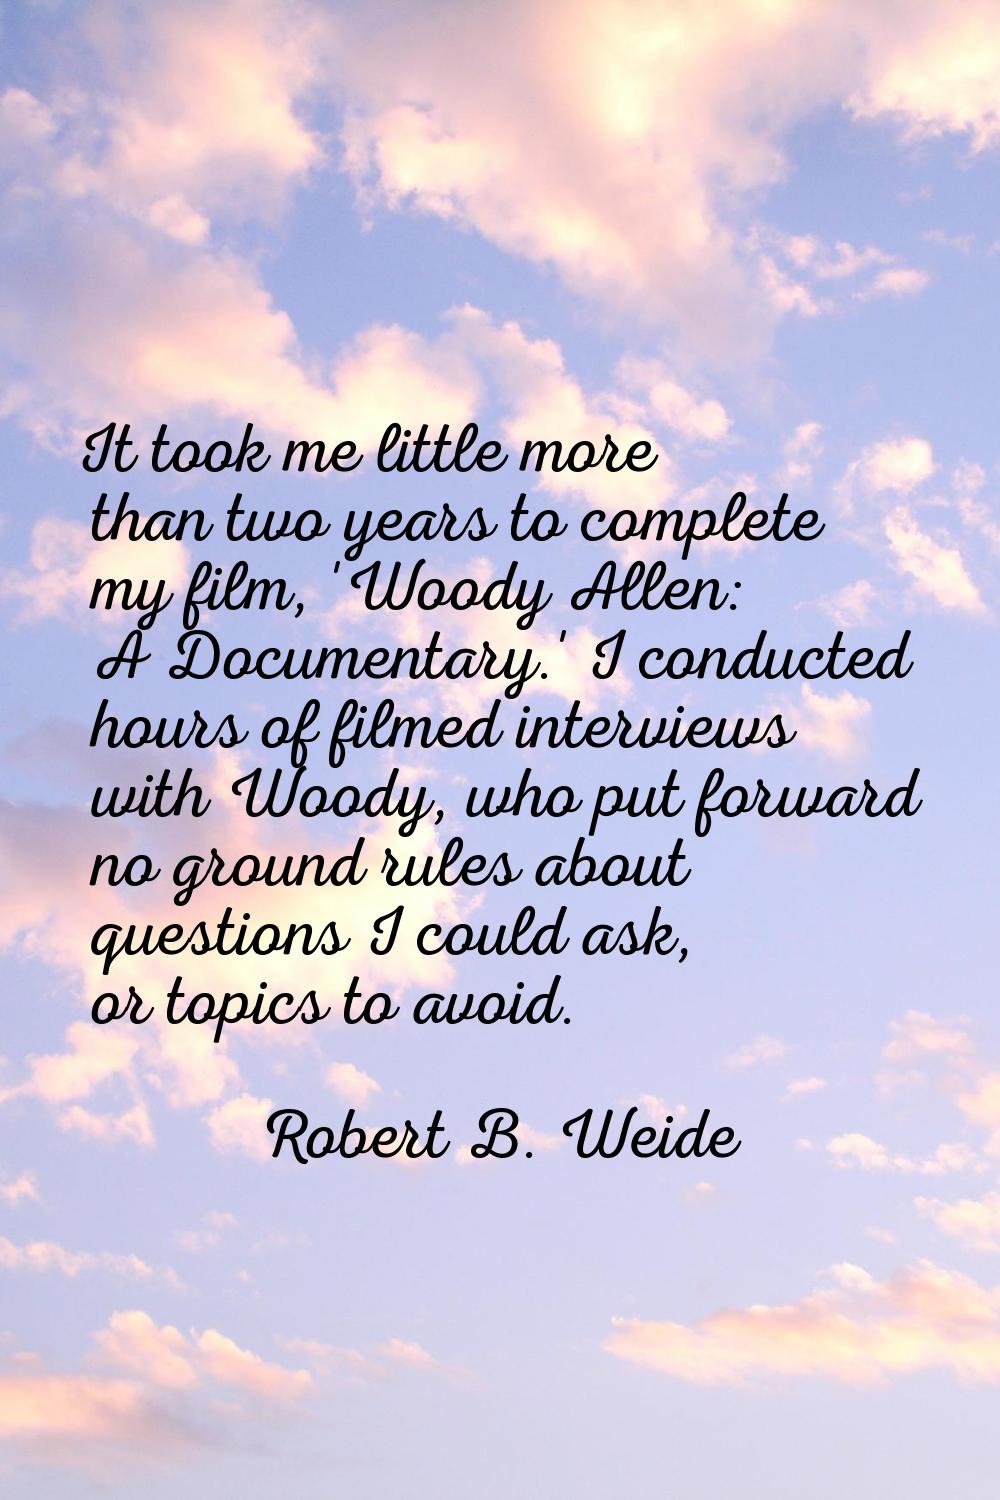 It took me little more than two years to complete my film, 'Woody Allen: A Documentary.' I conducte